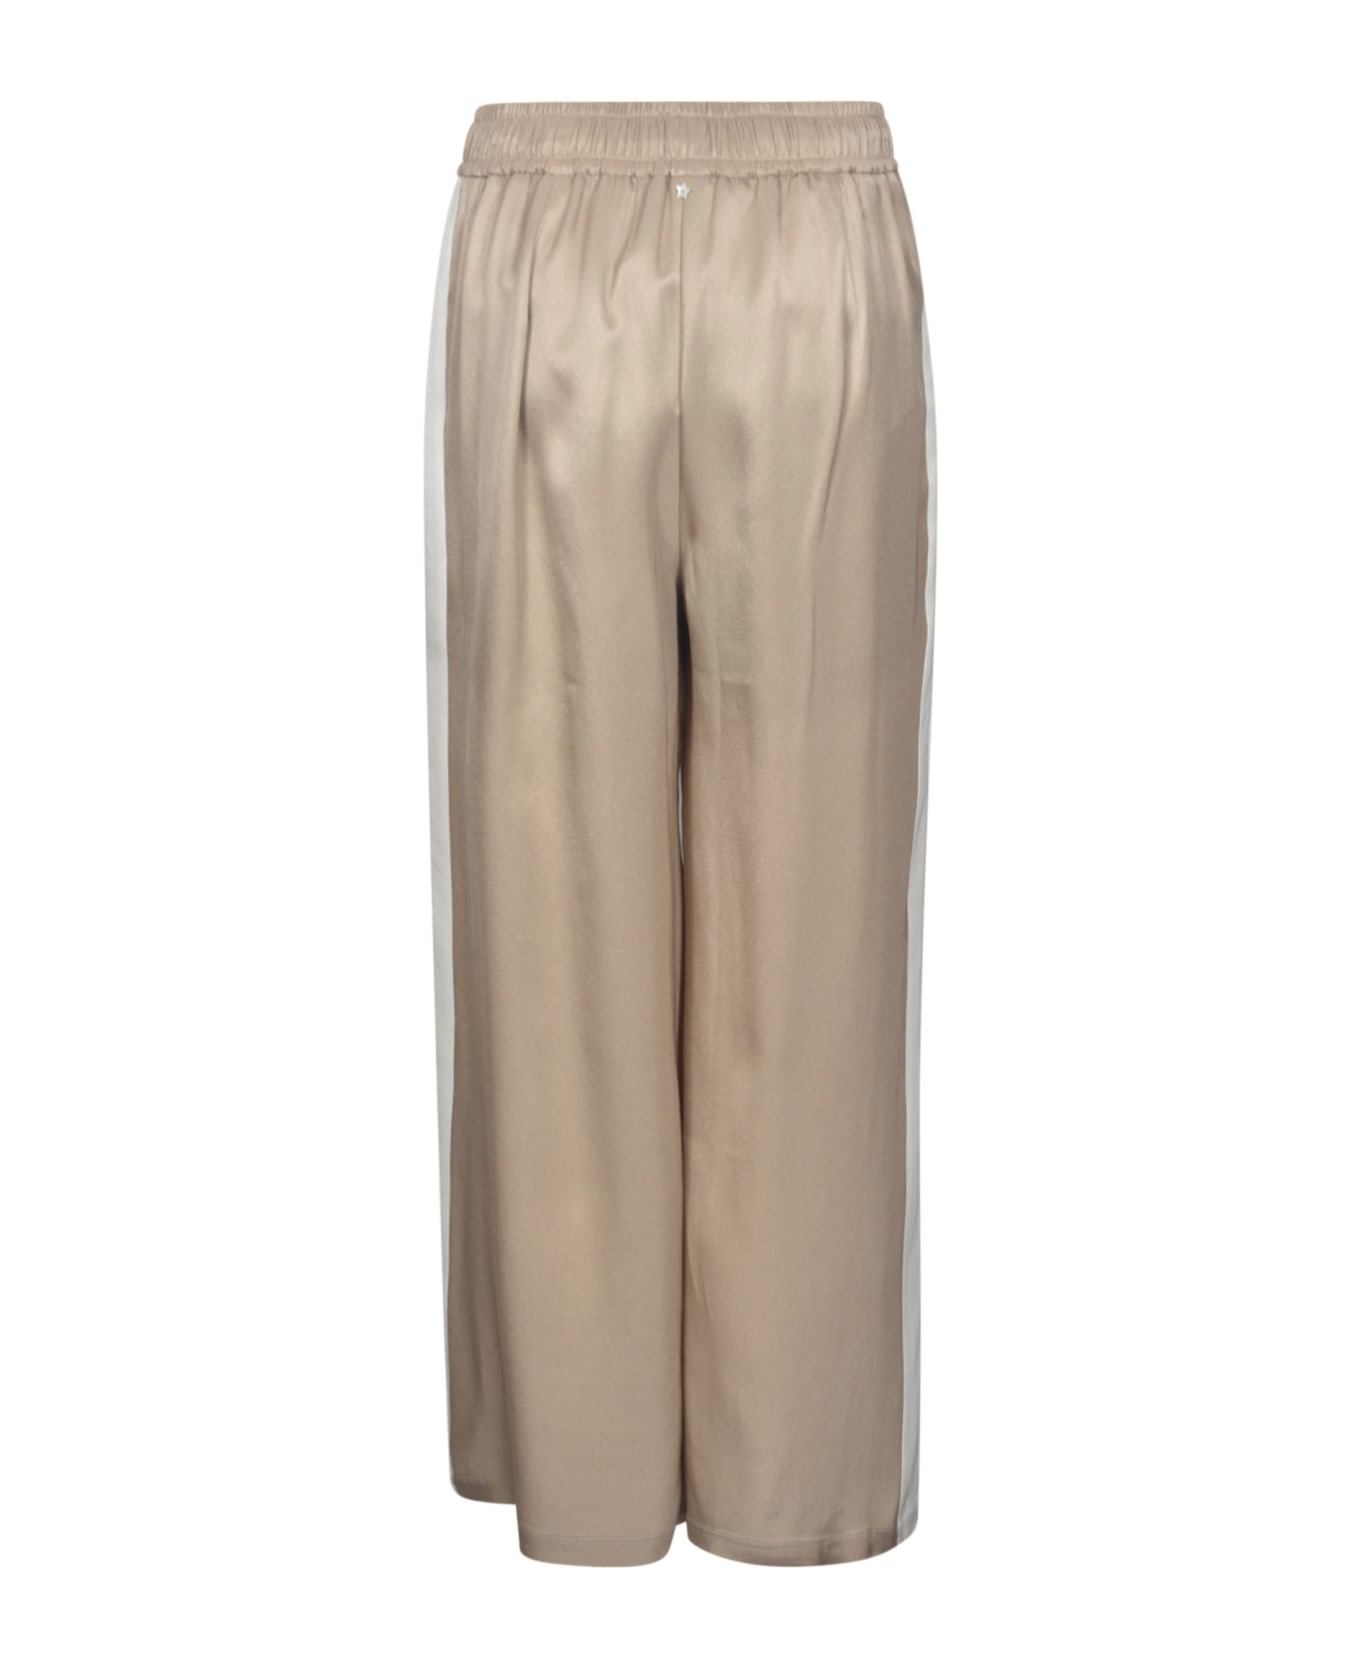 Lorena Antoniazzi Laced Straight Trousers - Beige ボトムス